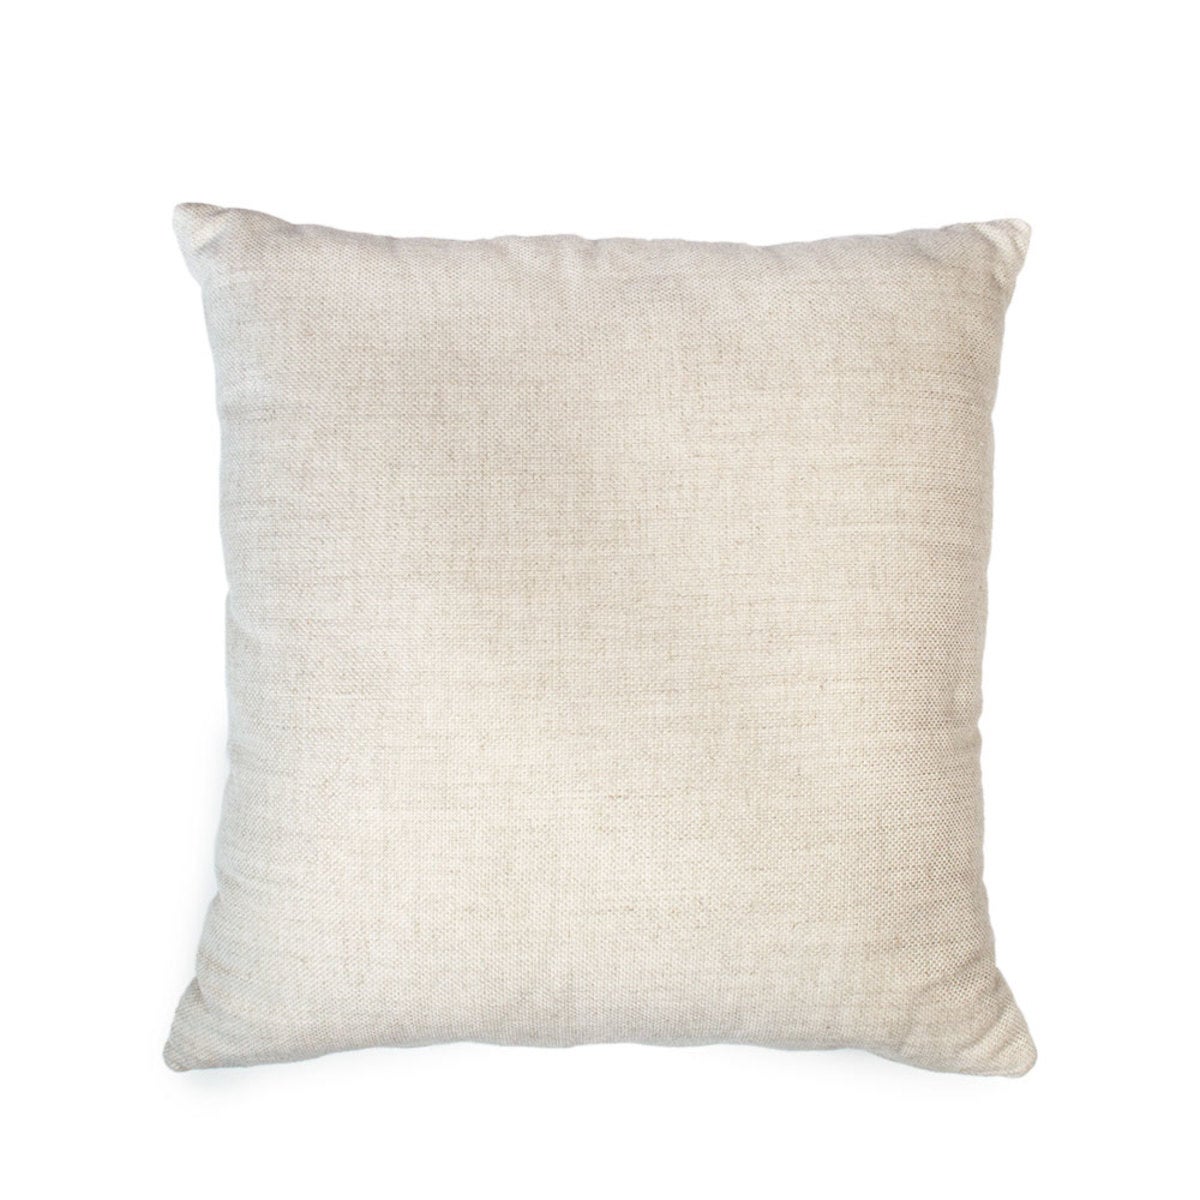 100% Pure Linen Pillow Cover 16" Square - Oyster